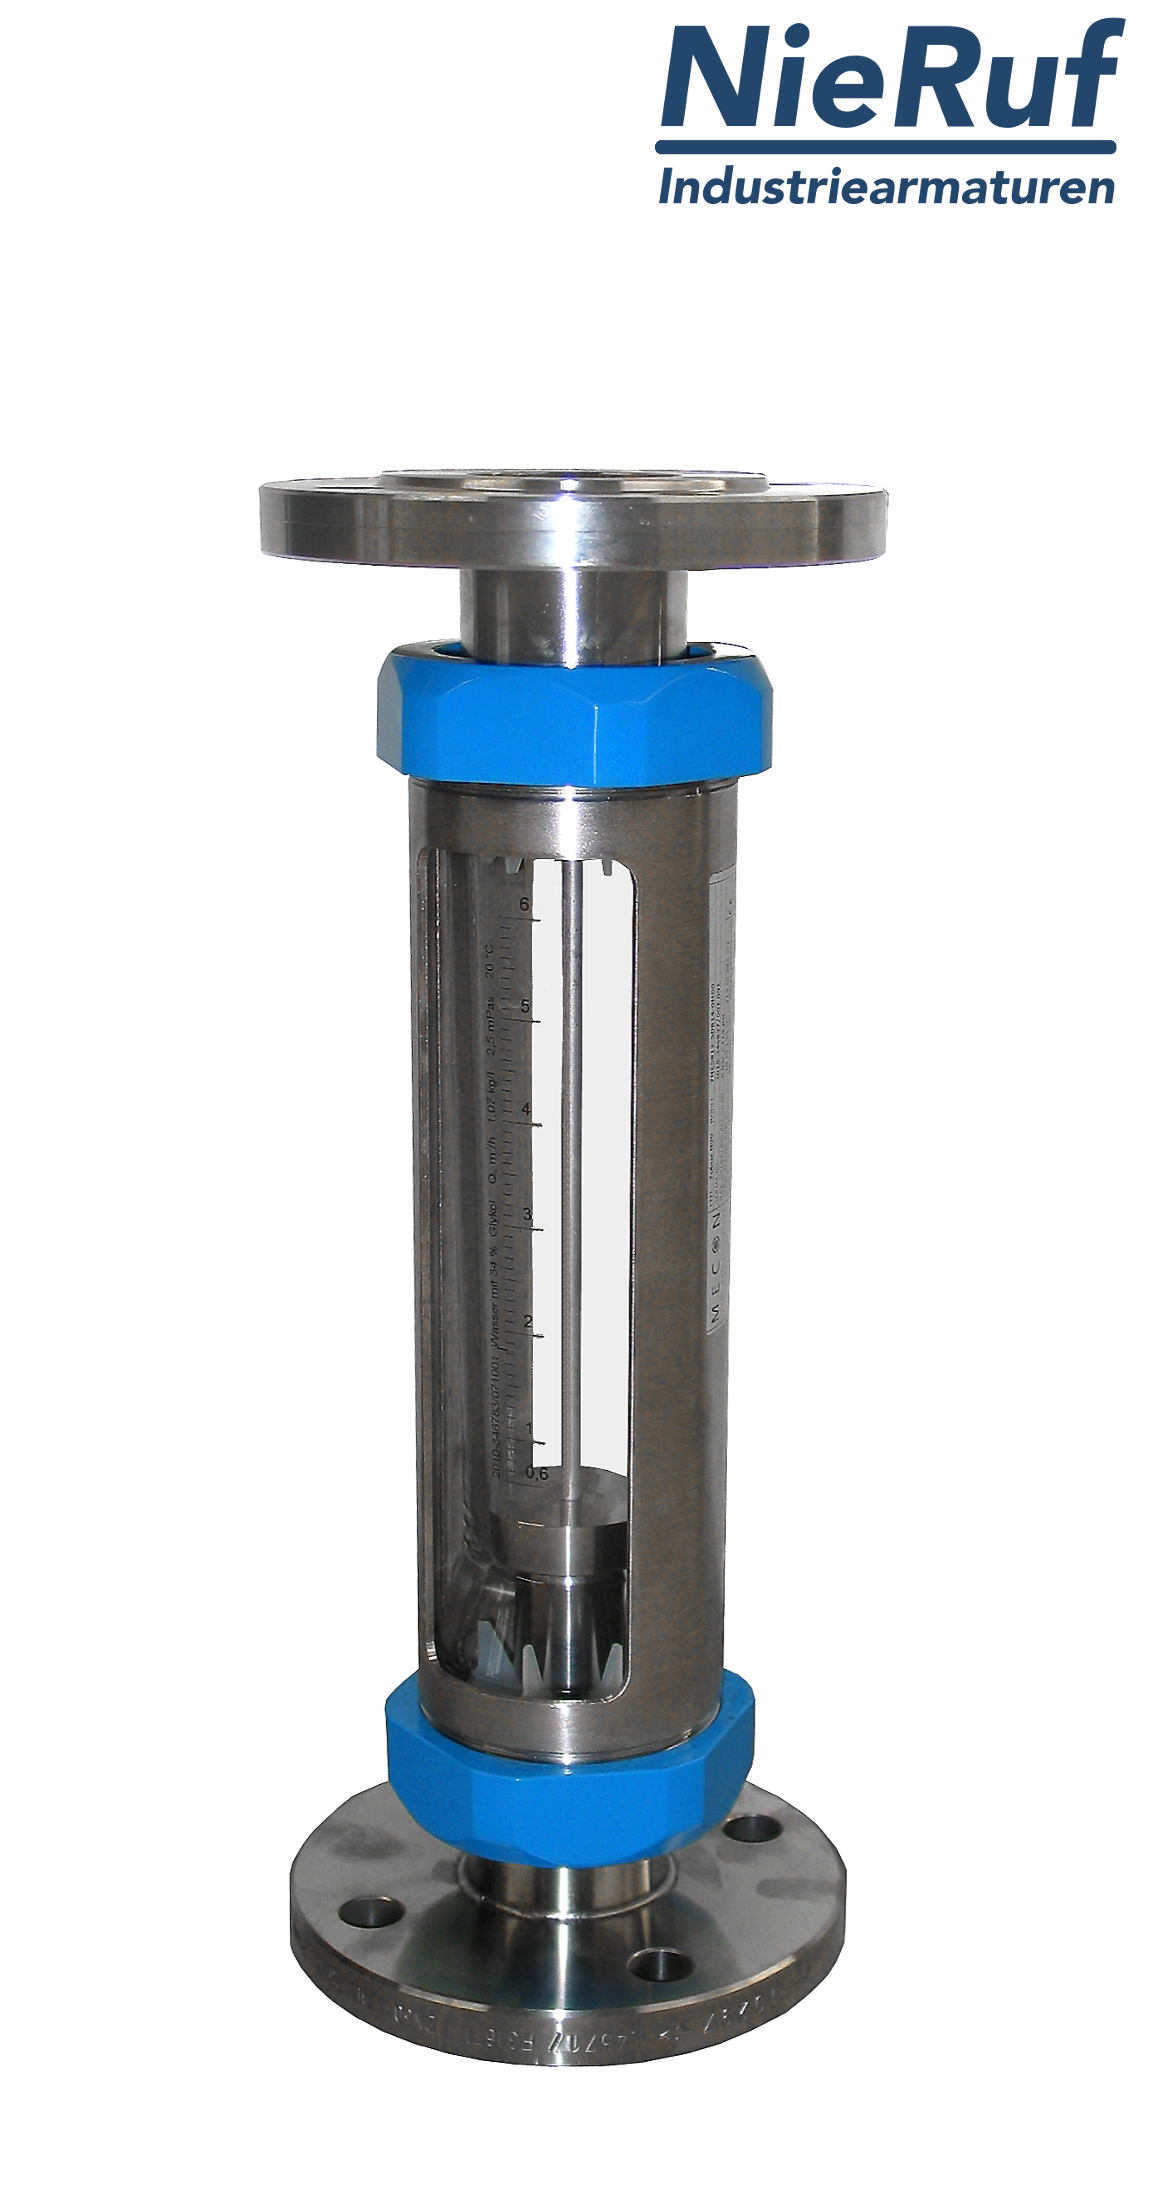 Variable area flowmeter stainless steel + borosilicate flange DN40 1000.0 - 10000 l/h water FKM